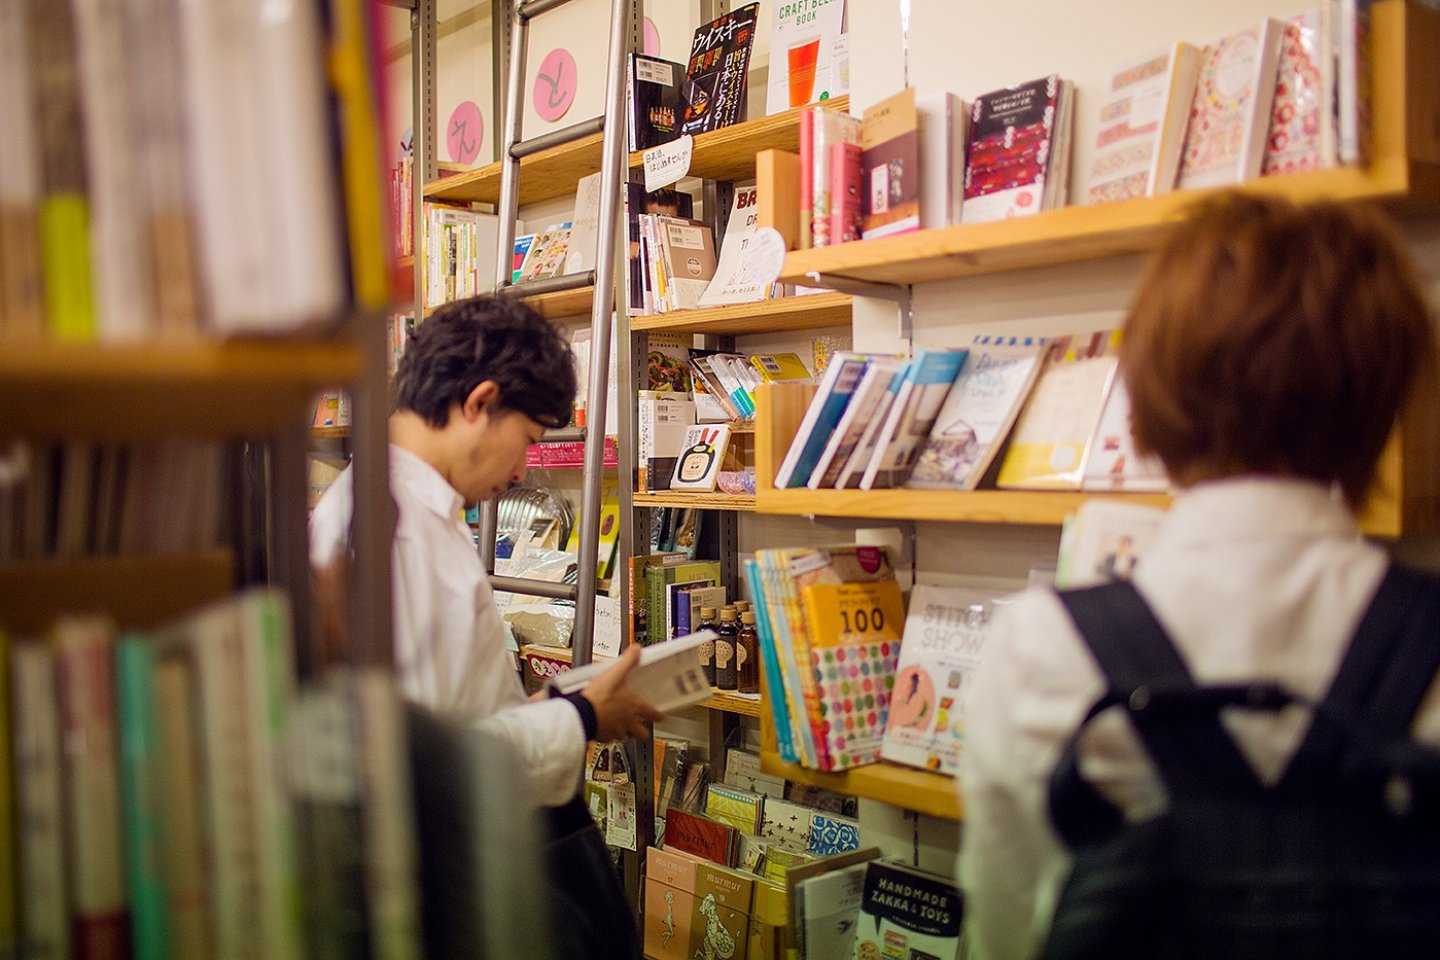 The bookstore, which is divided into three sections - books, cafe, and gifts - and features one of the best collections of books on special interest topics that you\'re likely to find in Japan.